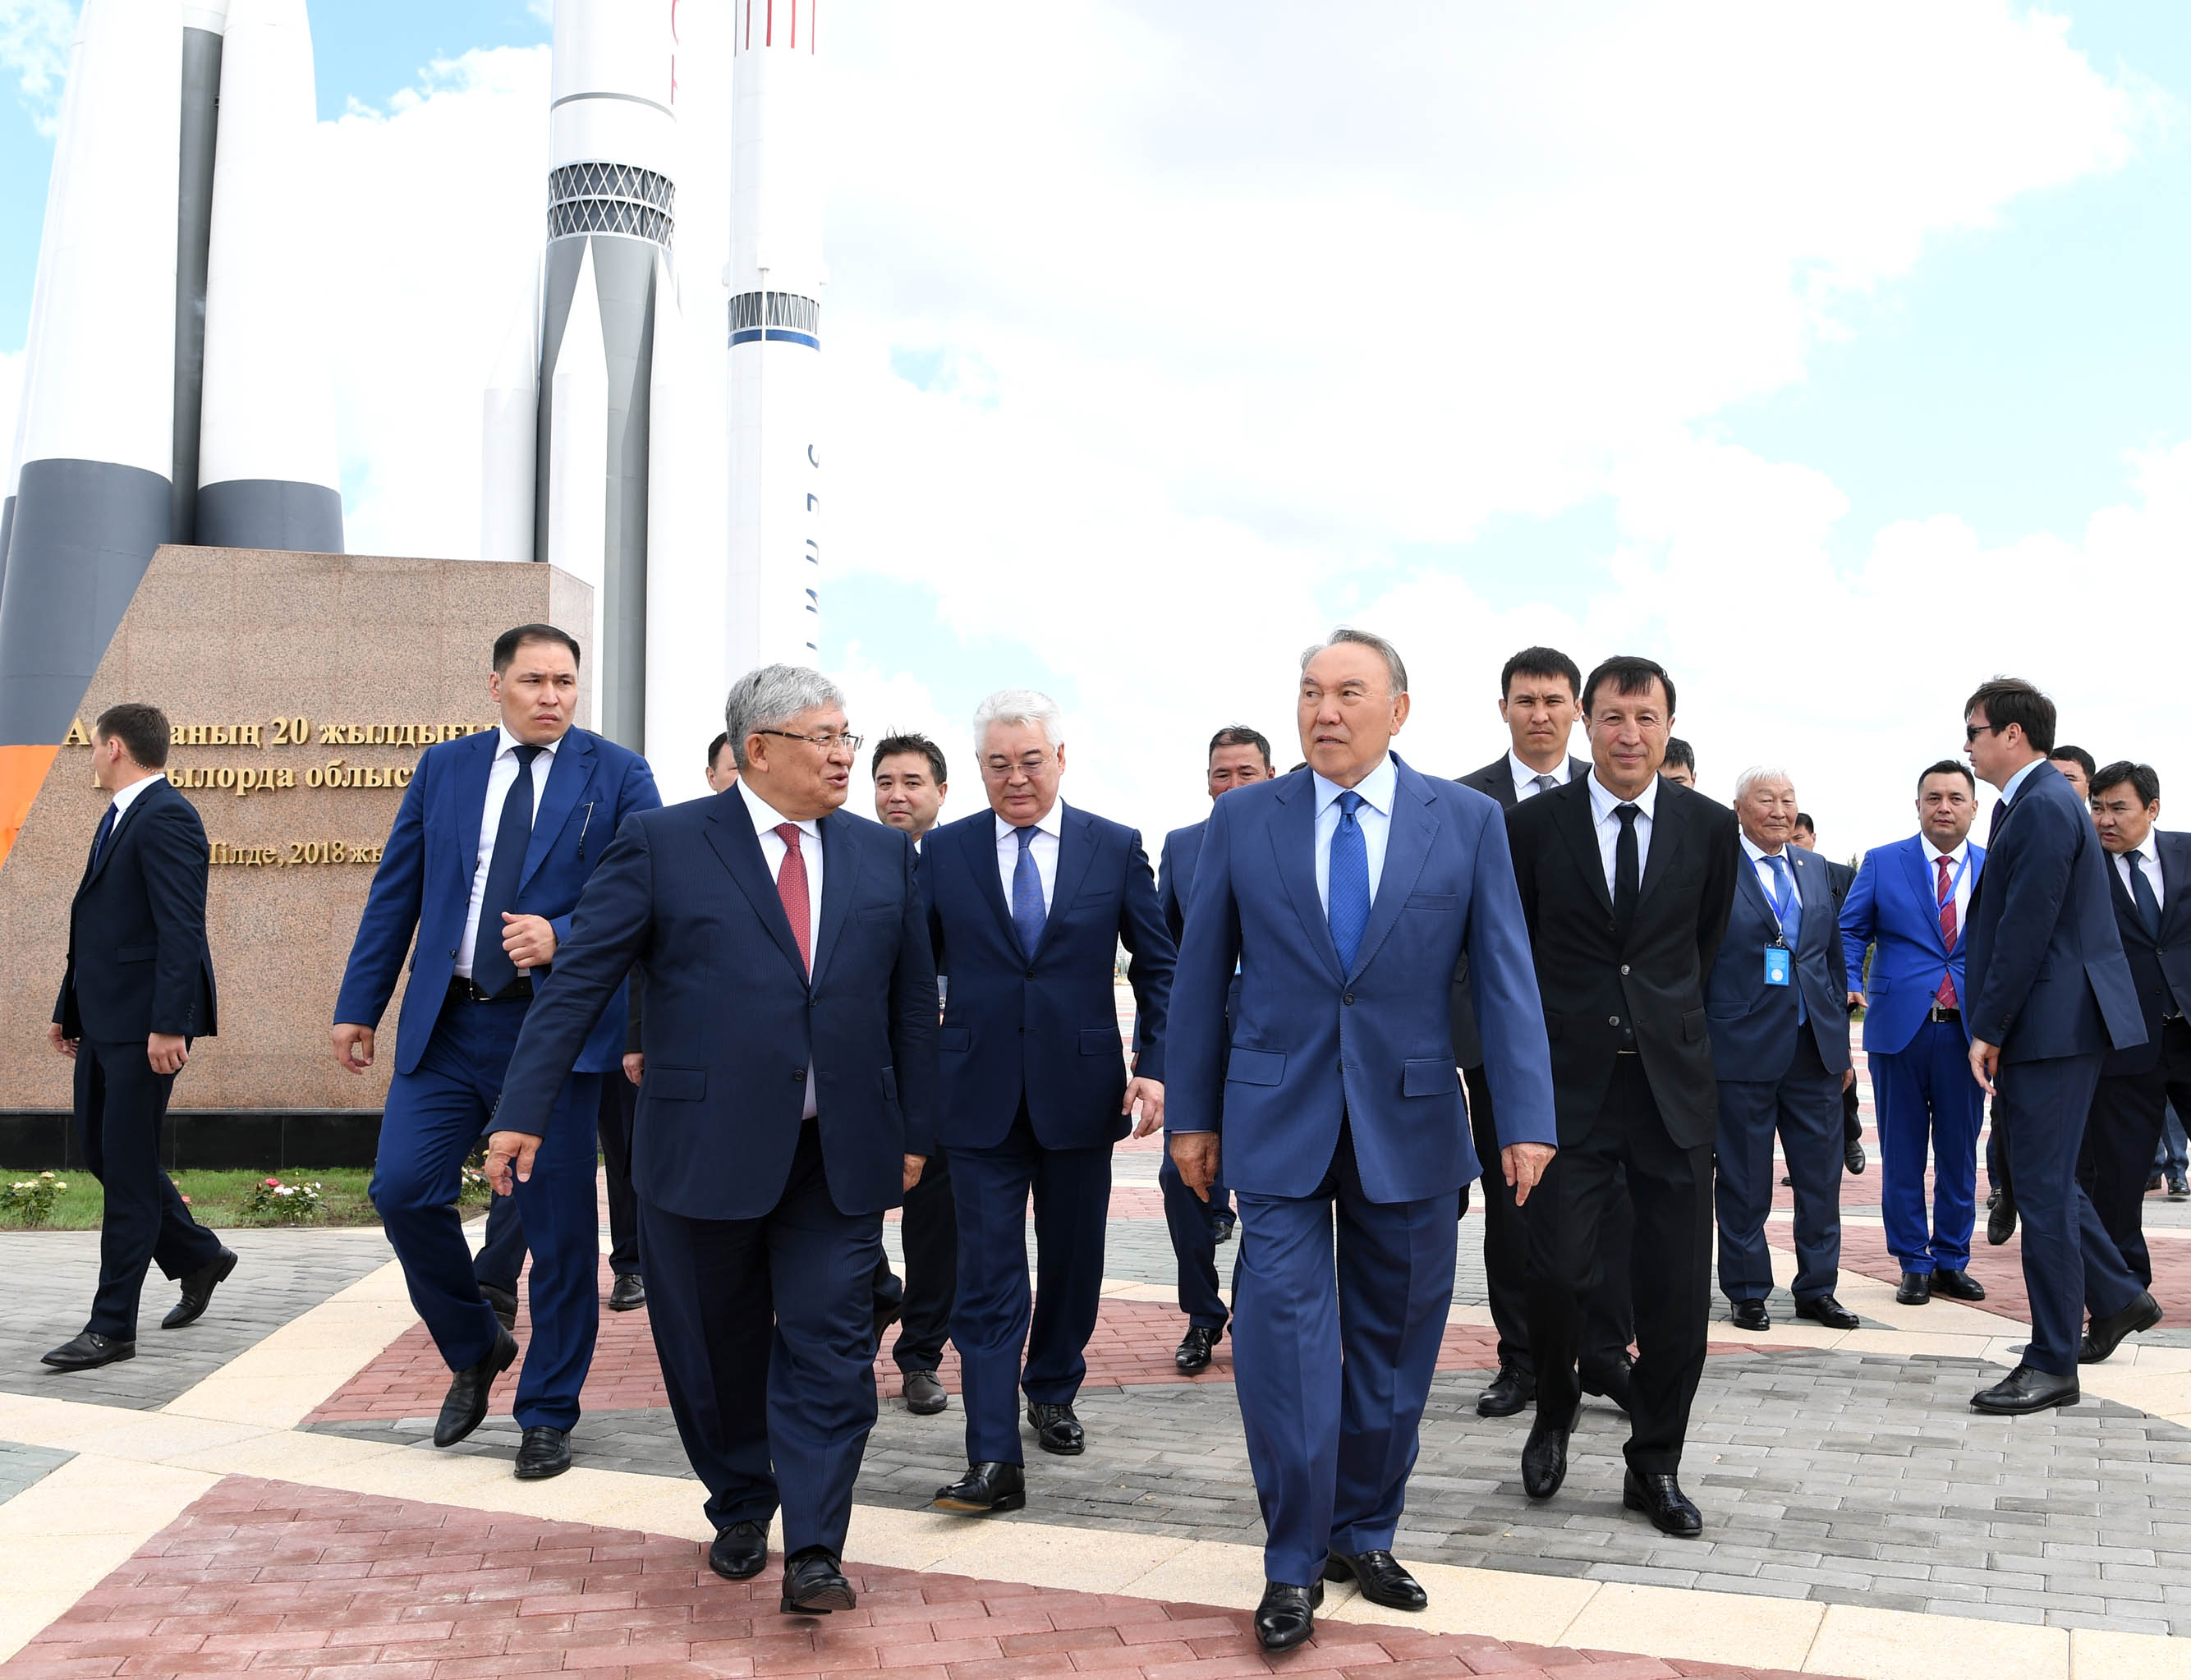 Nursultan Nazarbayev visits an open exposition of the Rocket and Space Equipment Museum